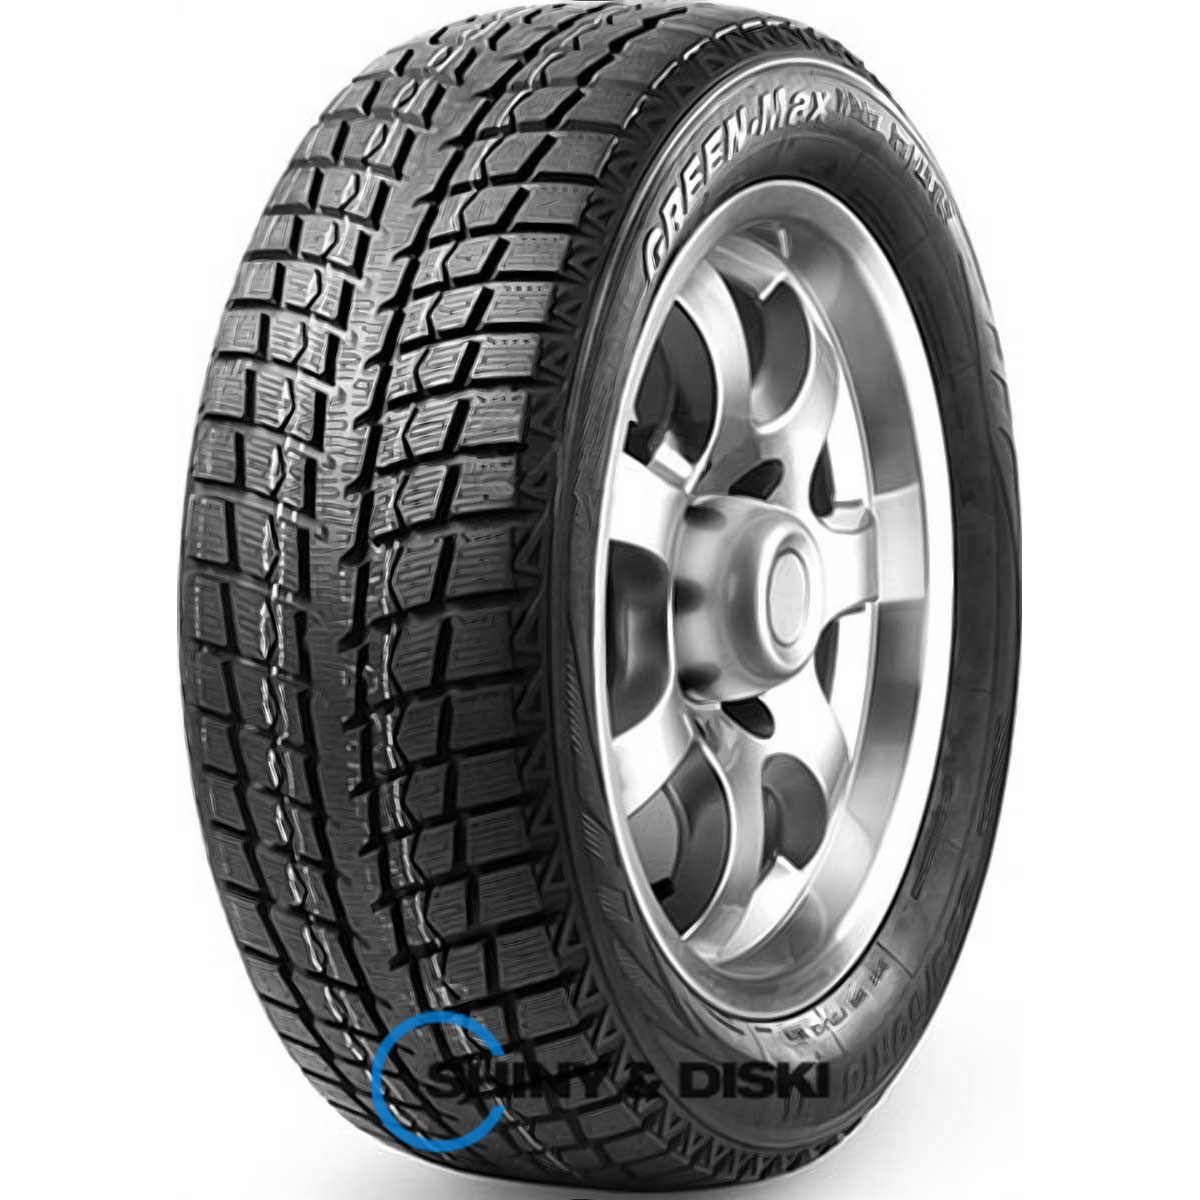 ling long green-max winter ice i-15 suv 255/45 r17 98t